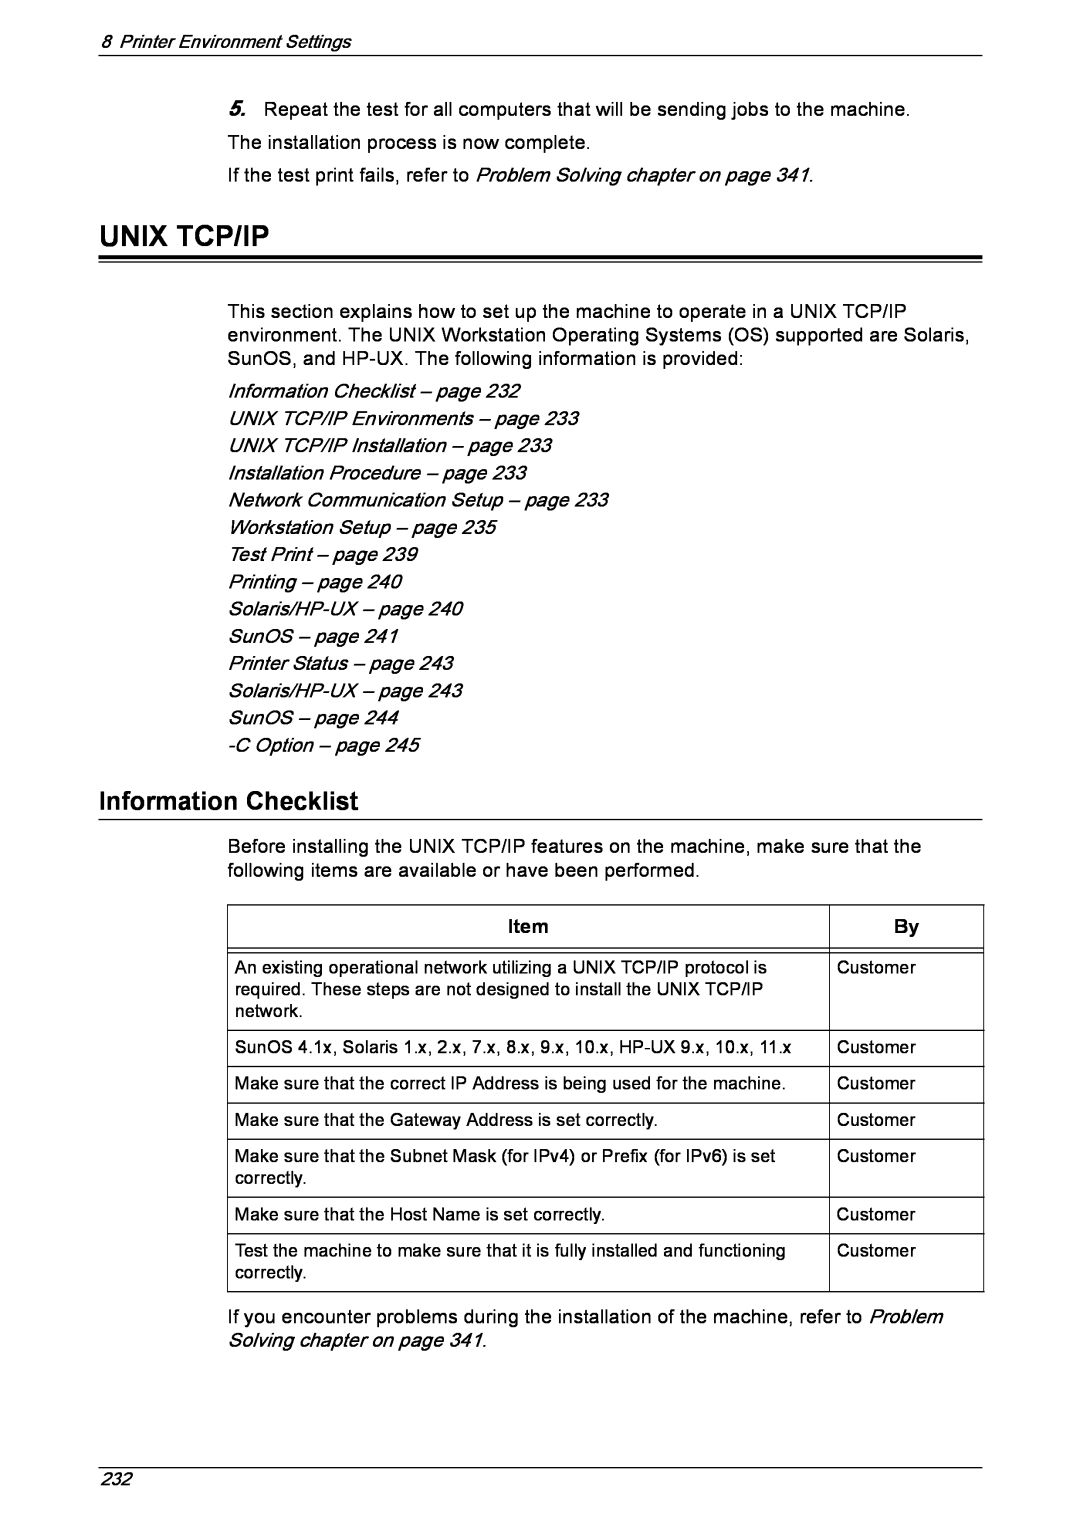 Xerox 5222 manual Unix Tcp/Ip, Information Checklist – page, COption – page, Item 